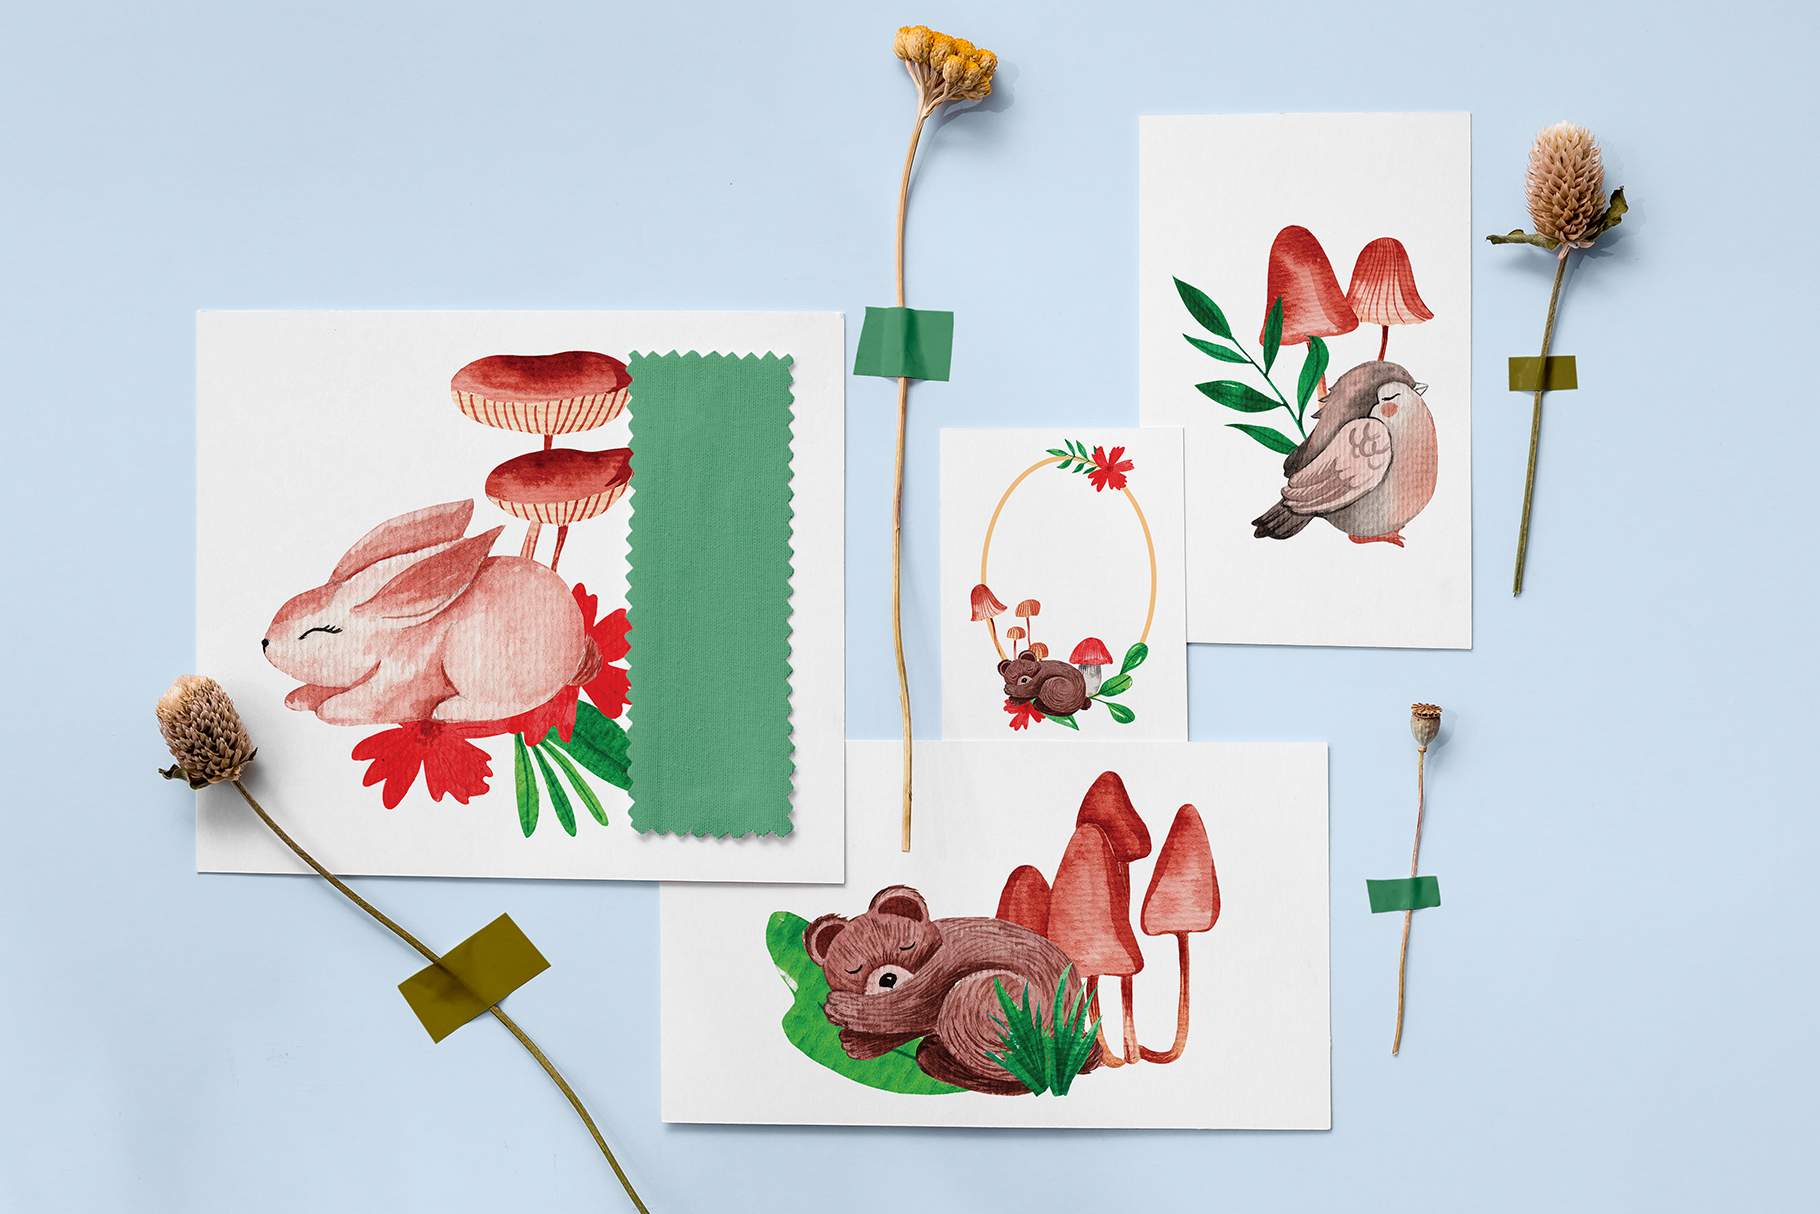 Group of cards with flowers and animals on them.